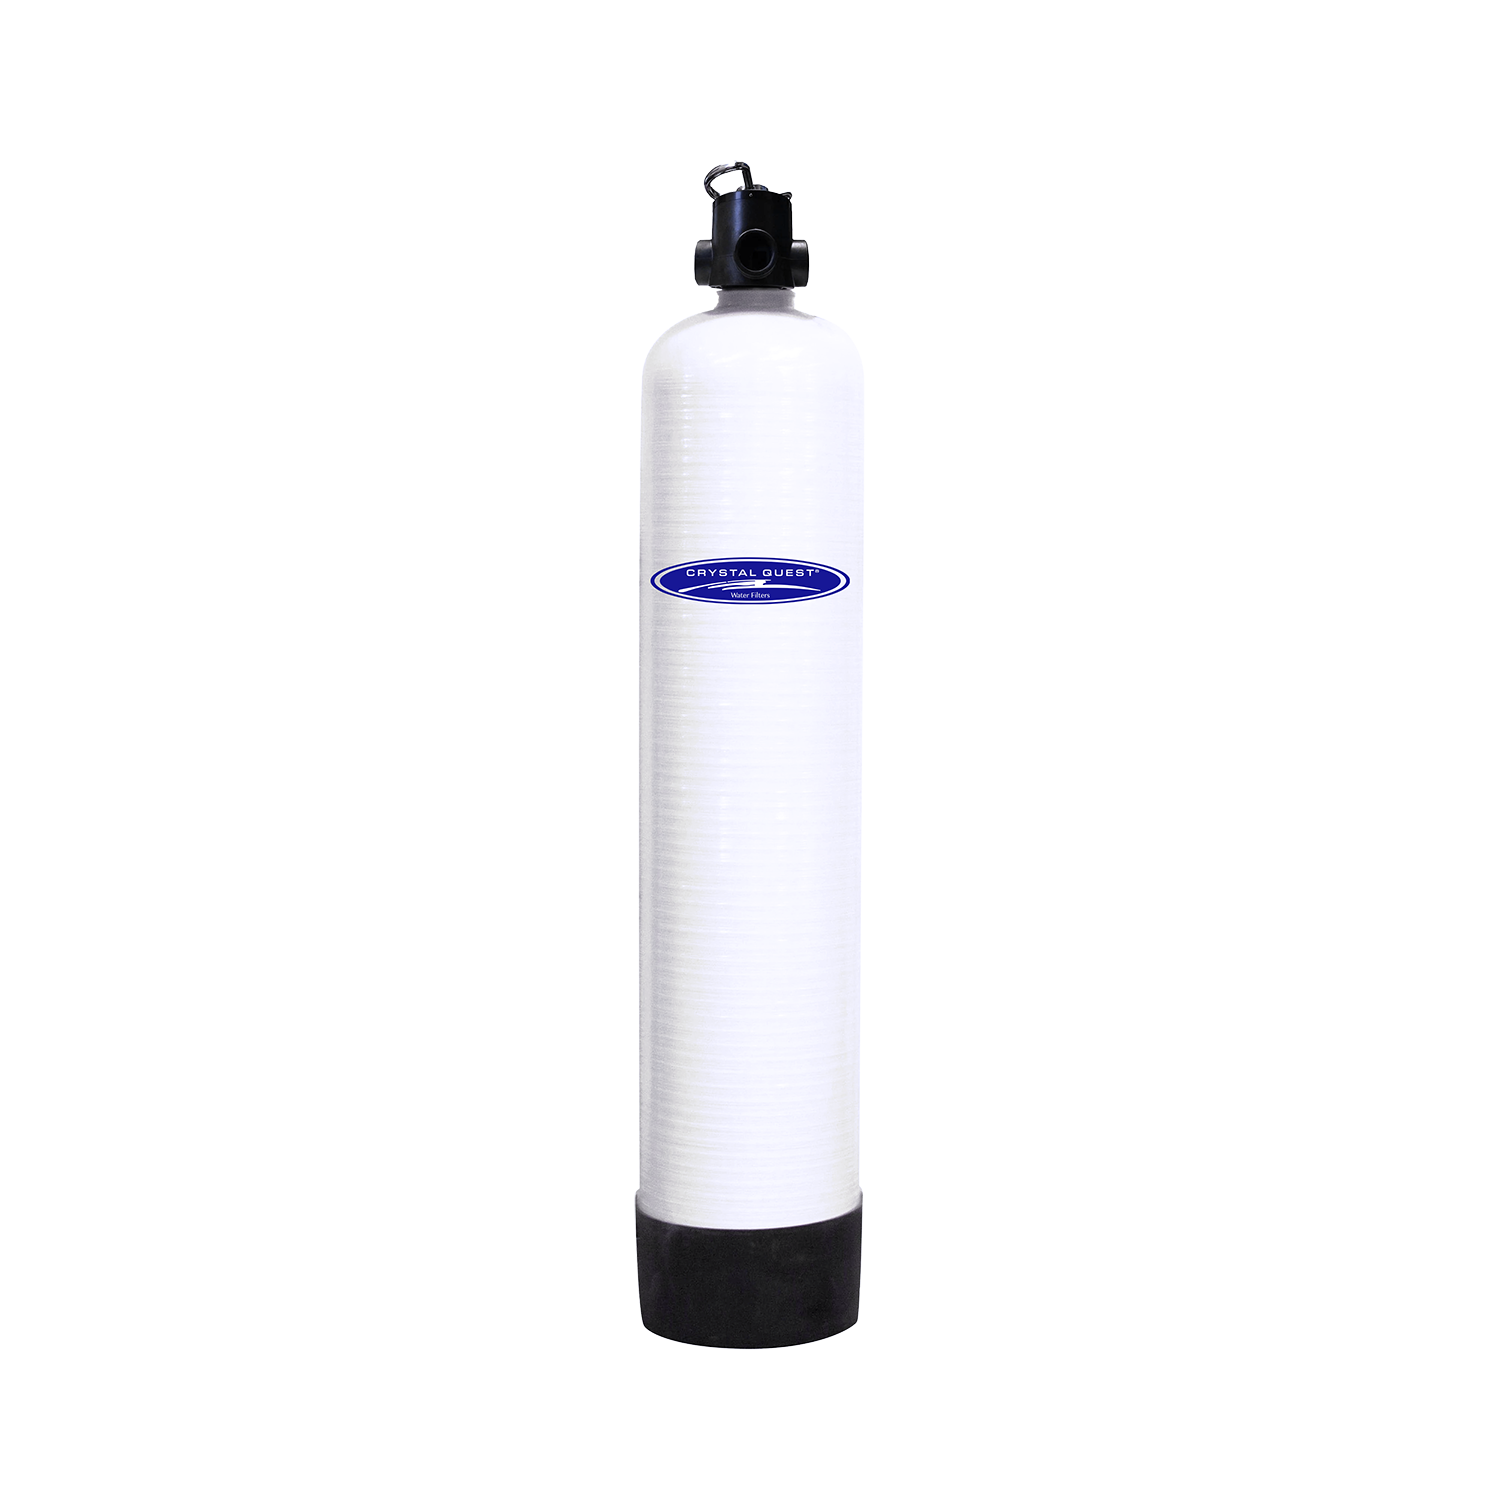 15 GPM / Manual (Downflow w/ Backwash) SMART GAC Water Filtration System - Commercial - Crystal Quest